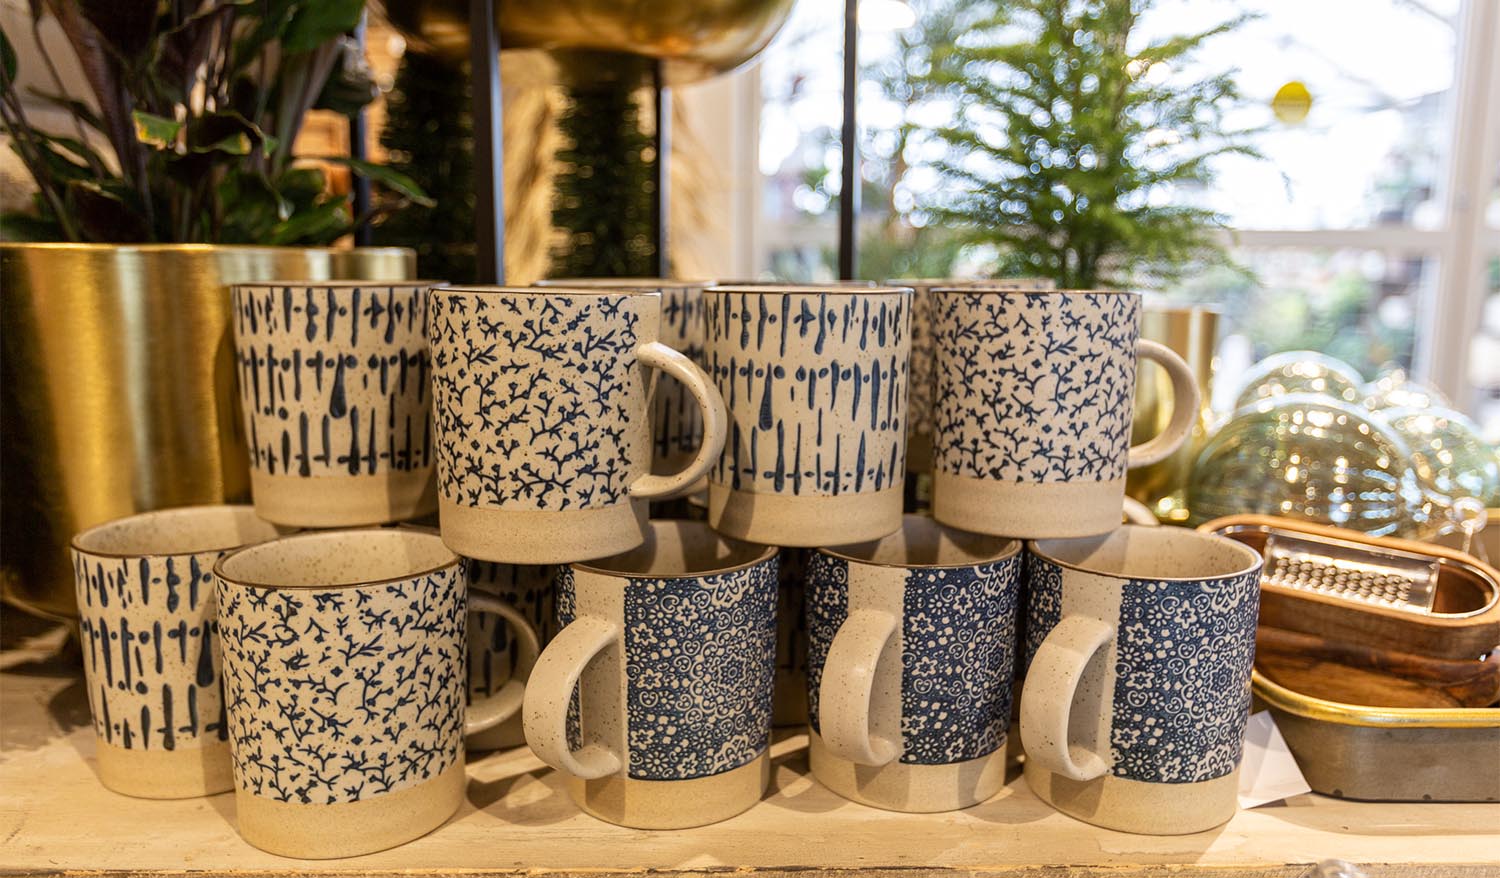 Blue and white mugs with intricate designs